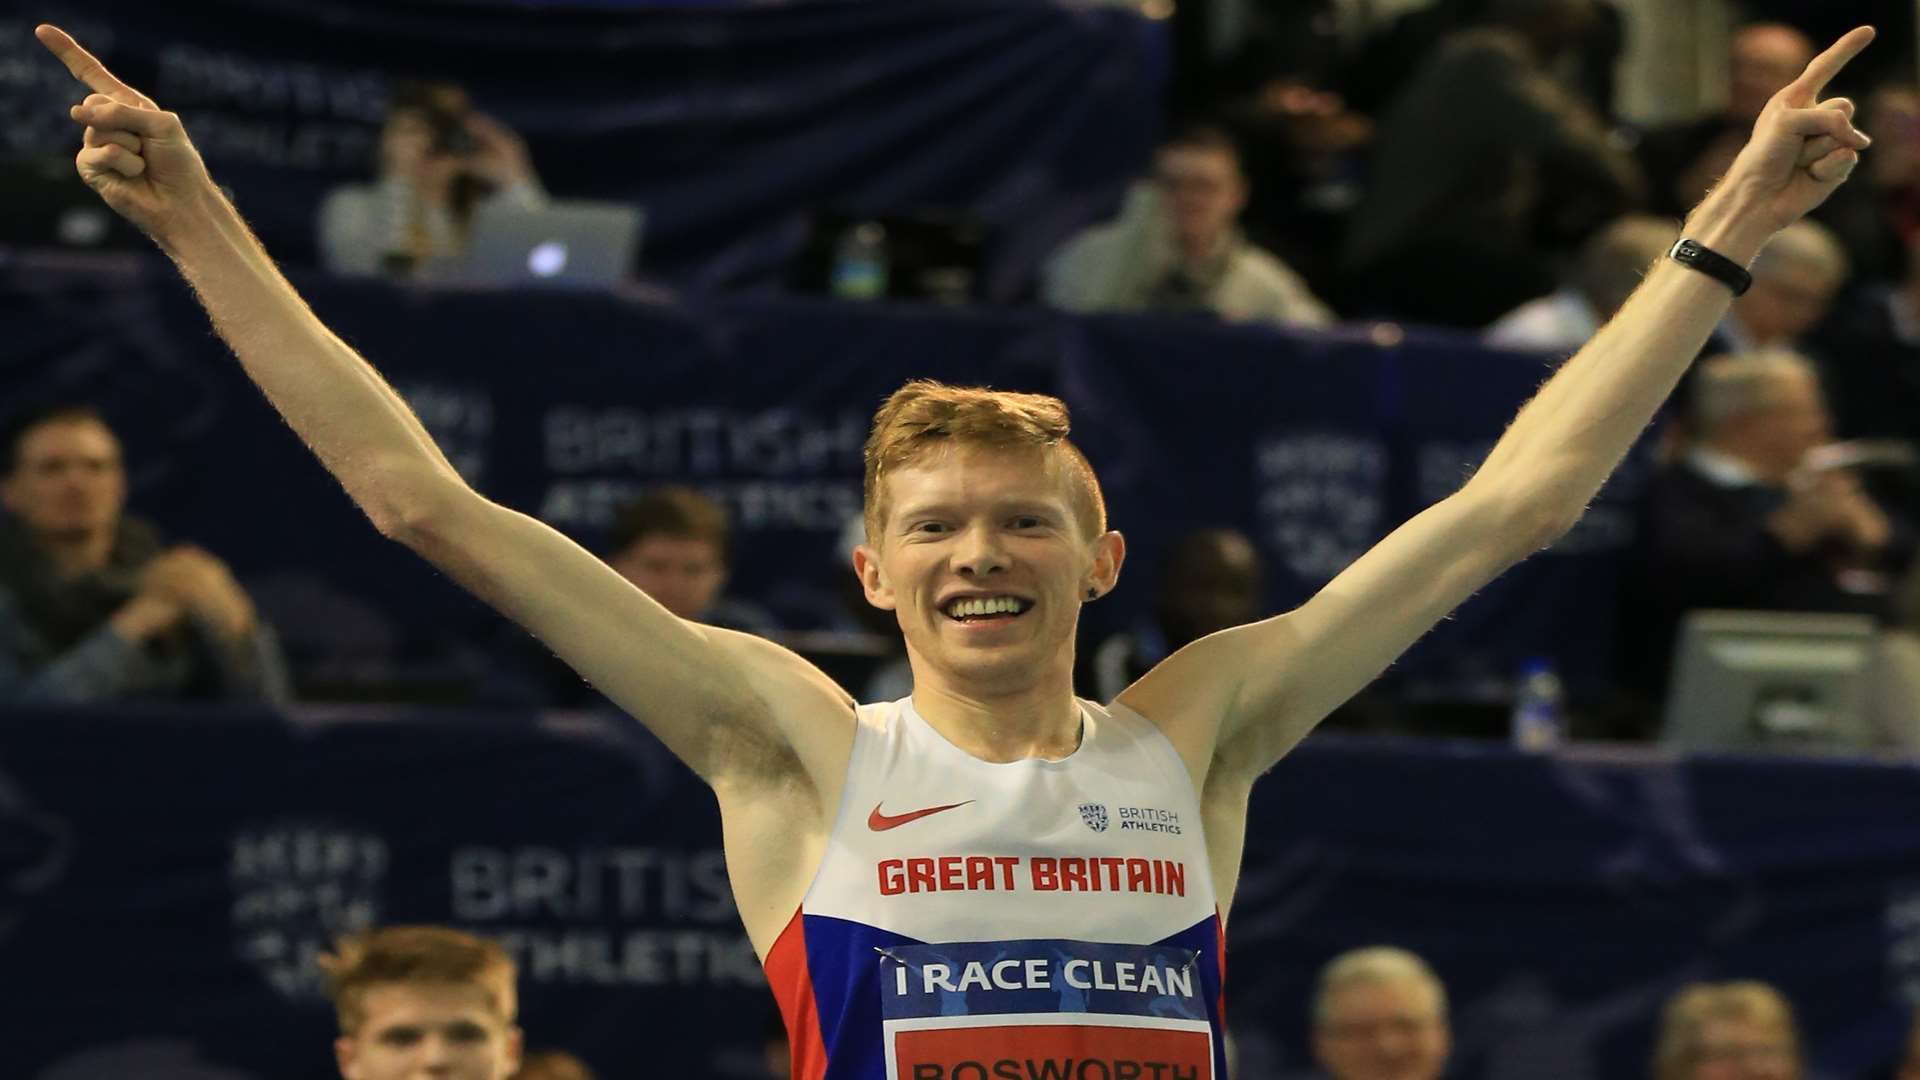 Tom Bosworth became the first British racewalker to break the 11-minute barrier indoors at 3,000m Picture: Stephen Pond/British Athletics